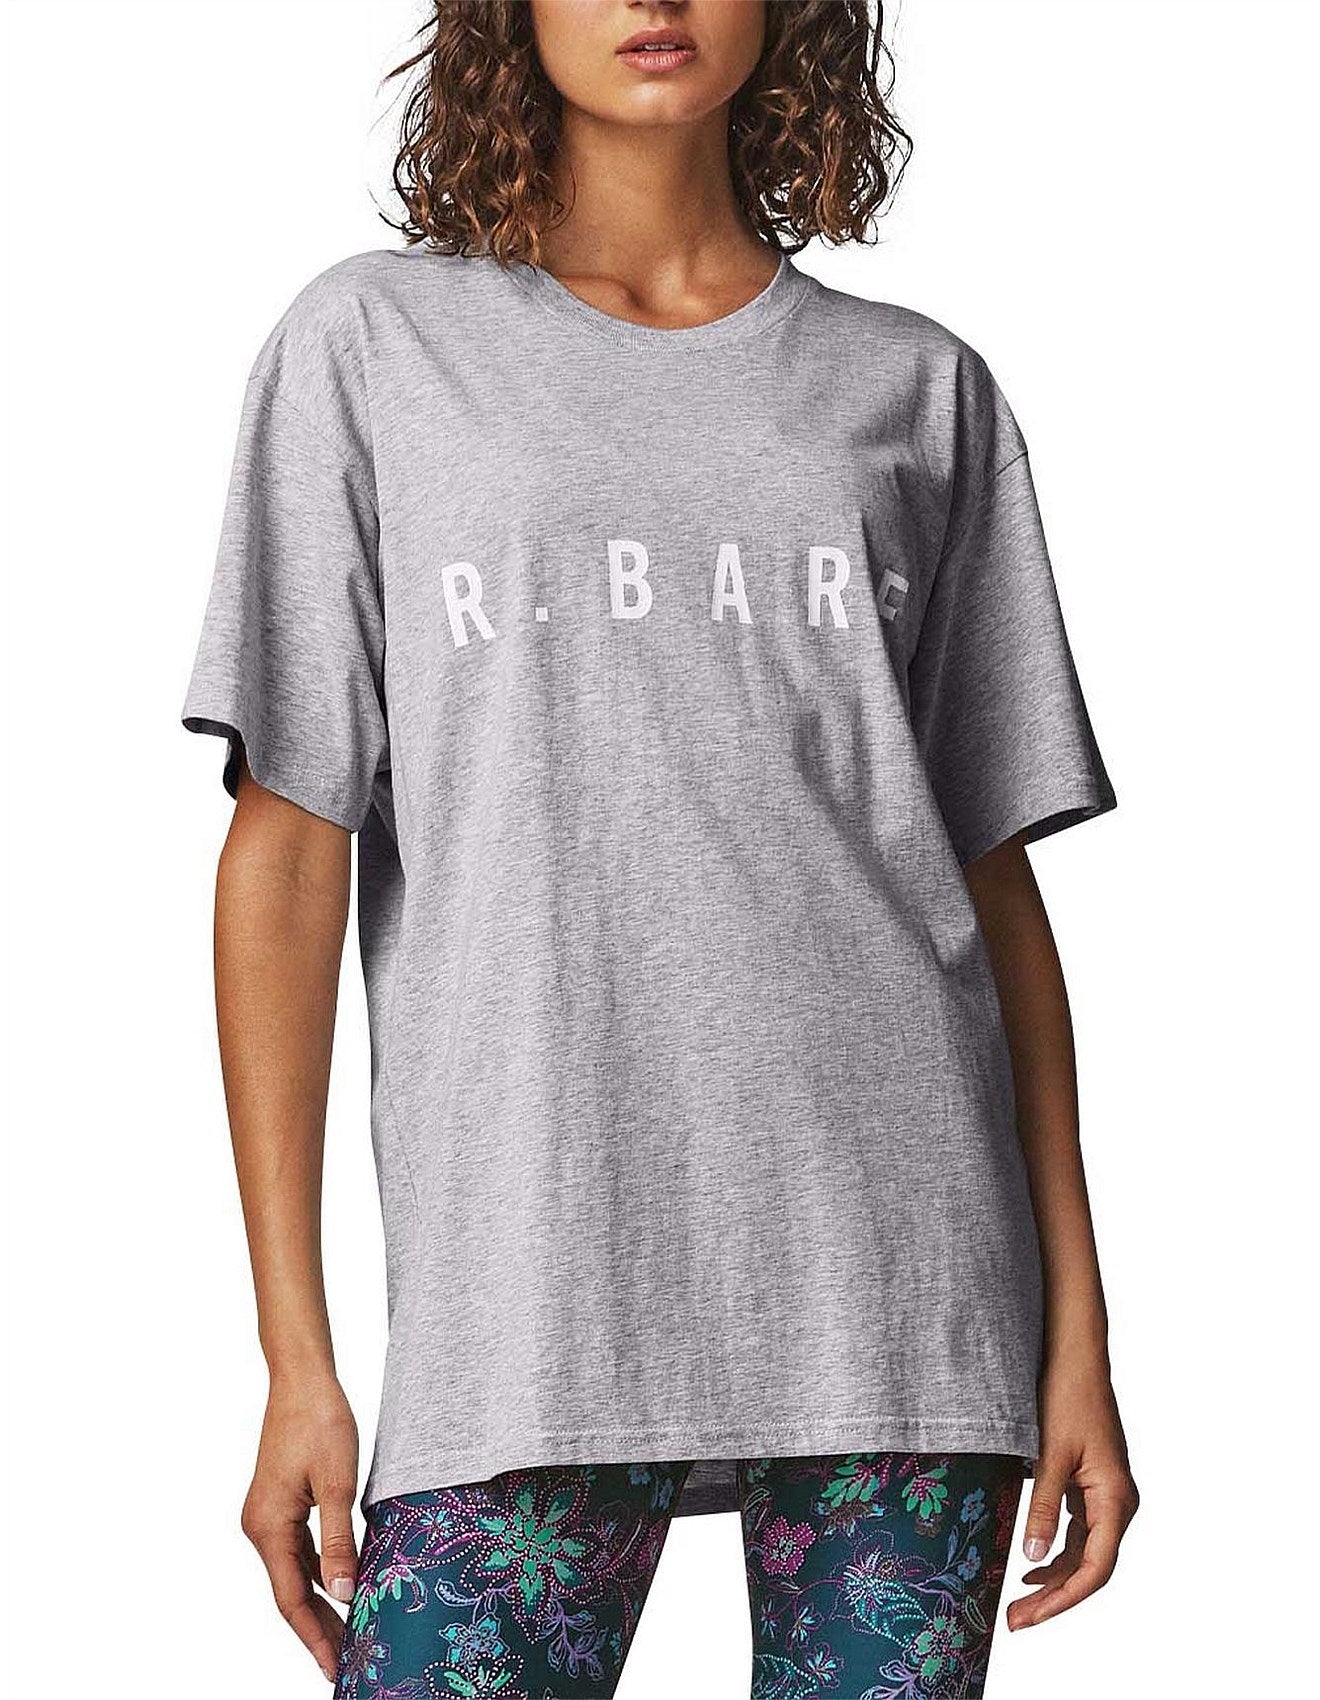 RUNNING BARE Hollywood 90s Tee - Silver Marle TOP 